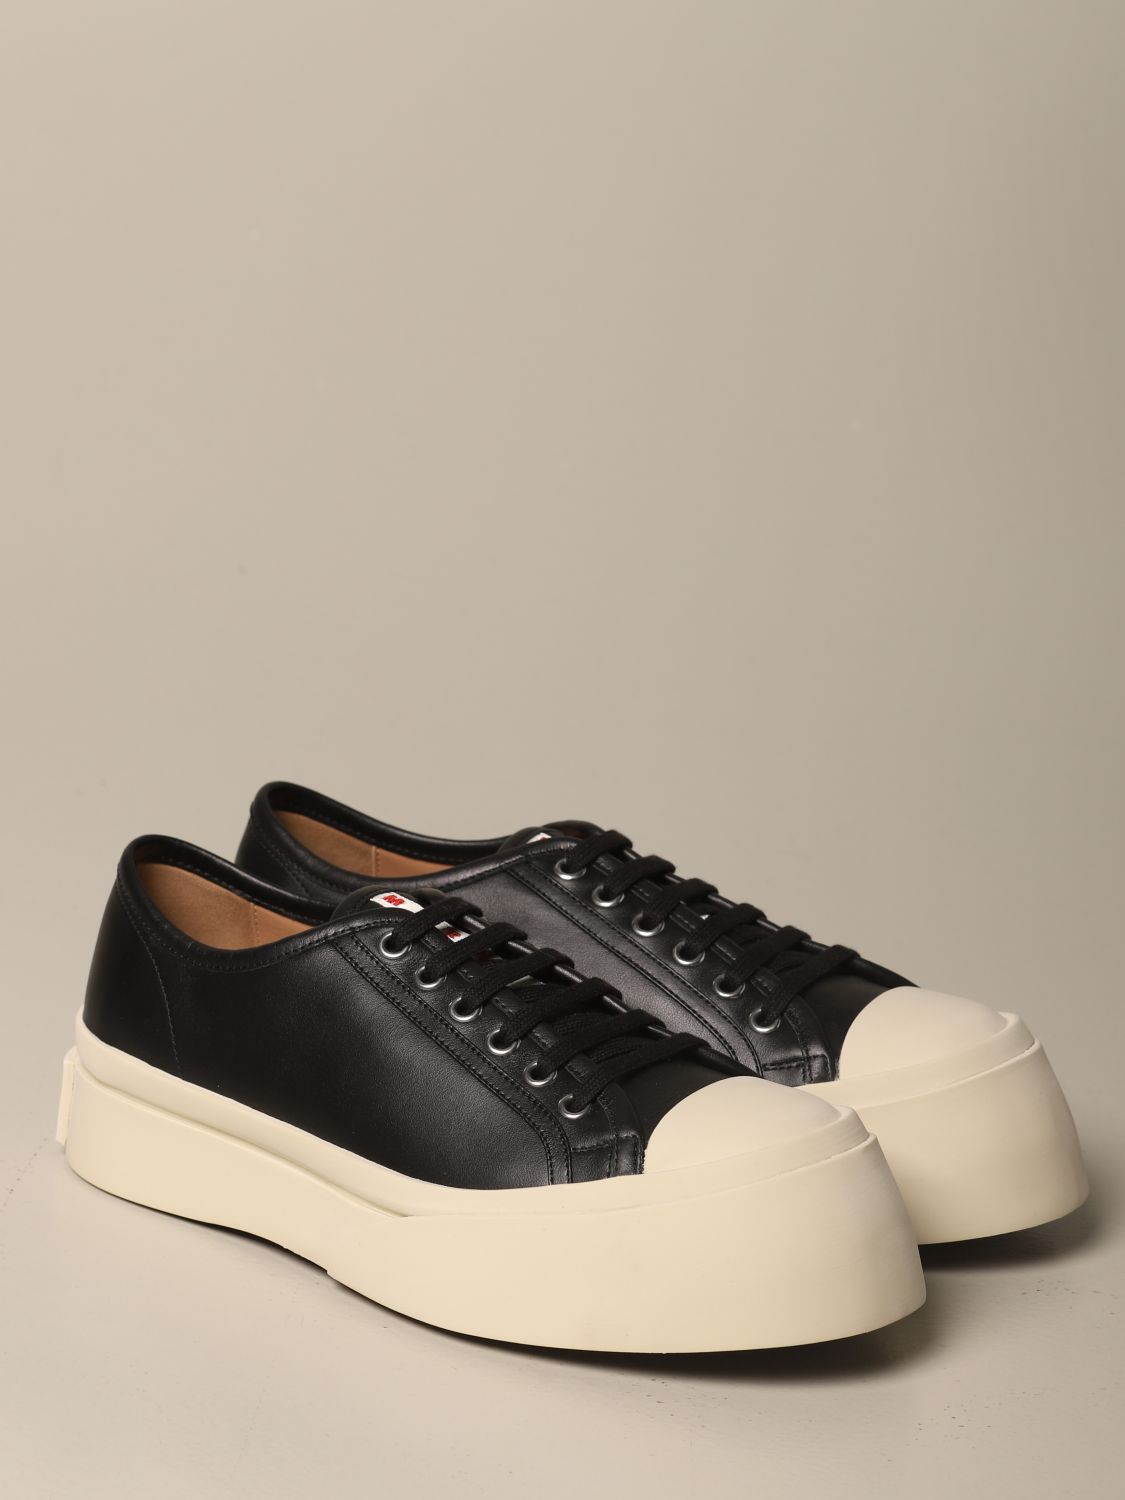 Marni Outlet: Pablo sneakers in nappa leather | Sneakers Marni Women Black | Sneakers Marni